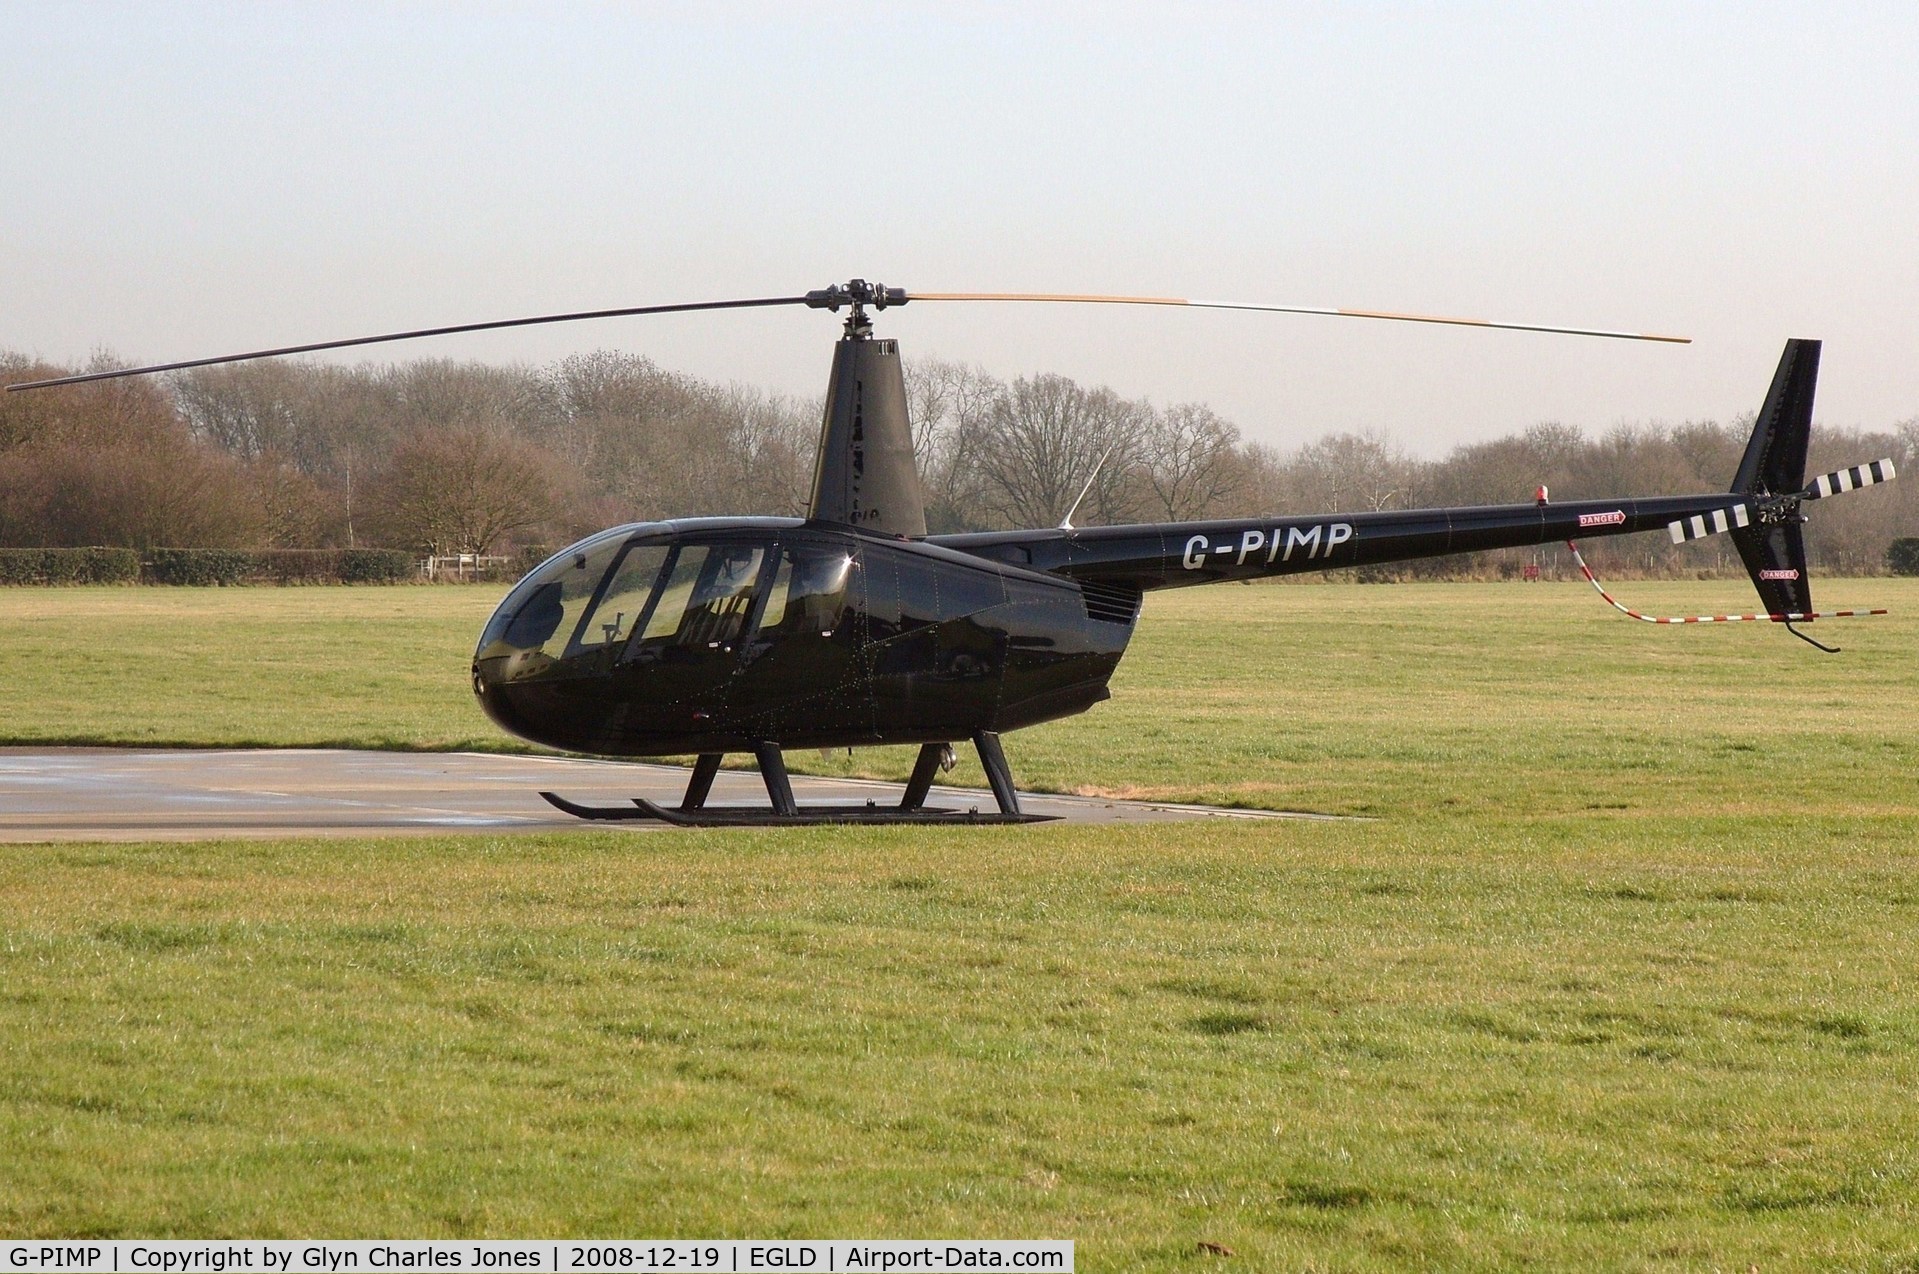 G-PIMP, 2008 Robinson R44 Raven II C/N 12123, This was seen on British TV last autumn with Simon Cowell of The X Factor and American Idol fame emerging from it. Owned by Helitech Charter Ltd.